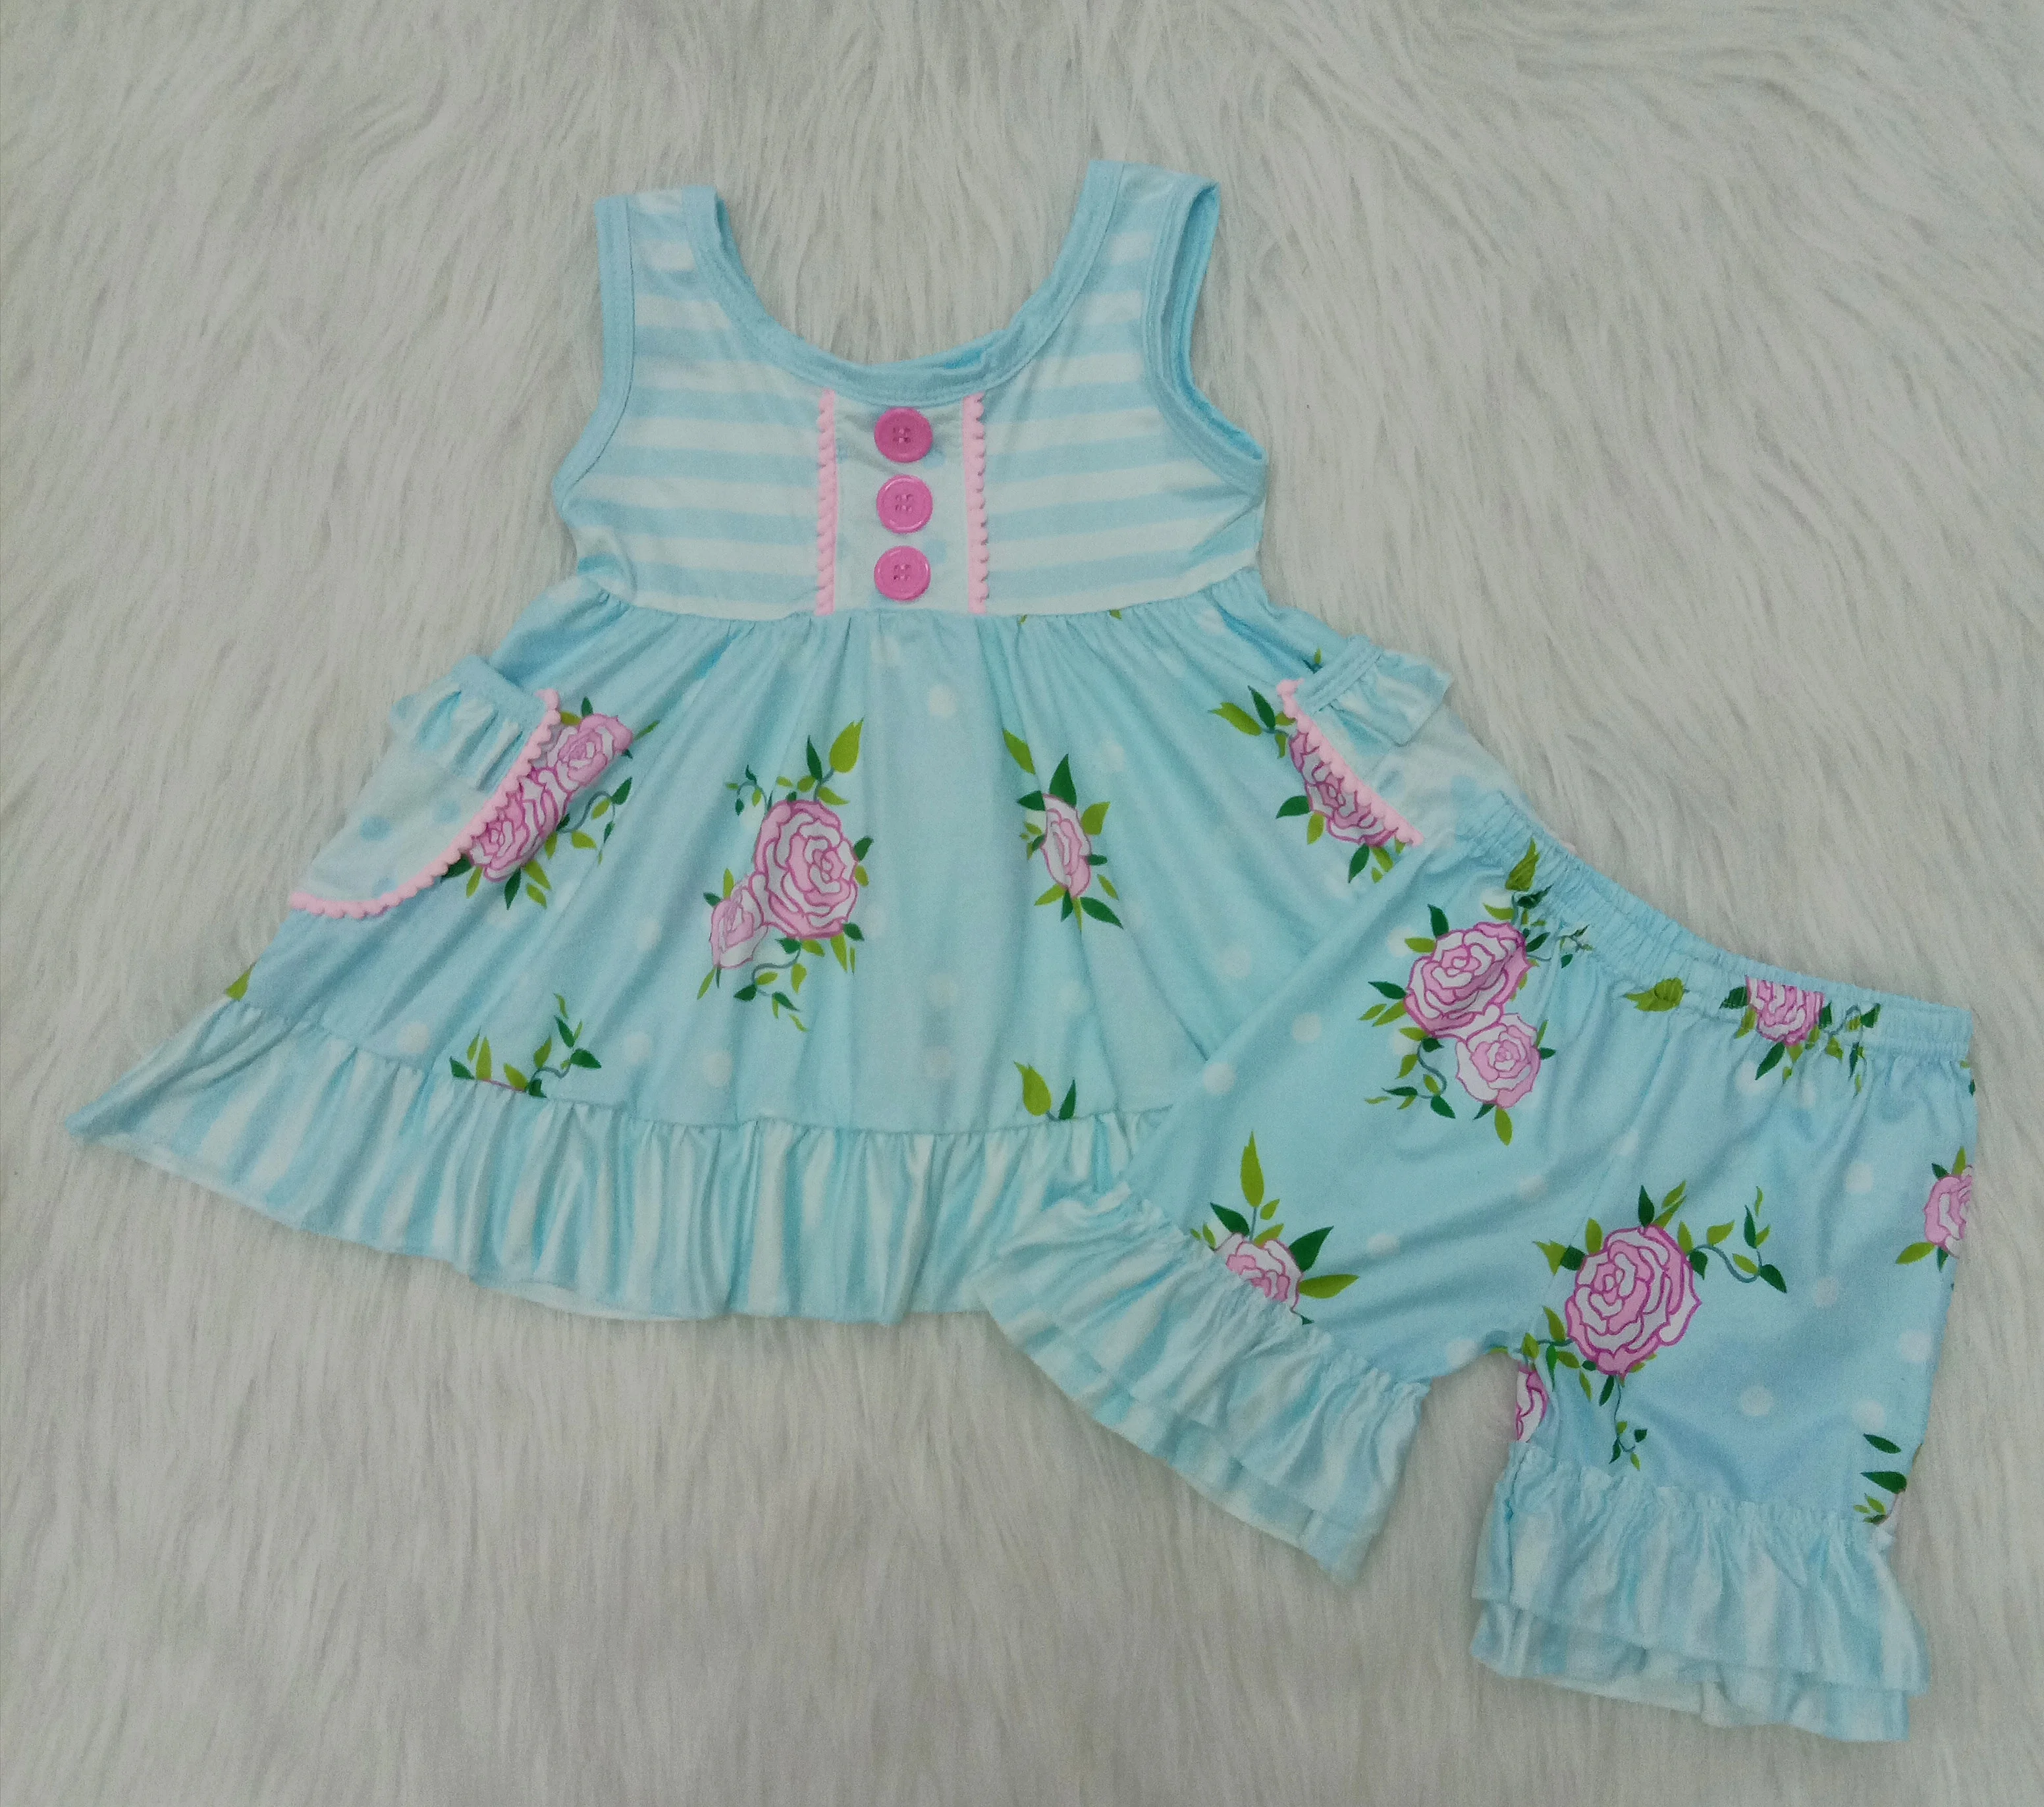 

Boutique Kids Girls Remake Outfit Summer Cute Blue Floral Sleeveless Tunic Top With Ruffle Shorts Baby Ifant Clothing Hot Sale